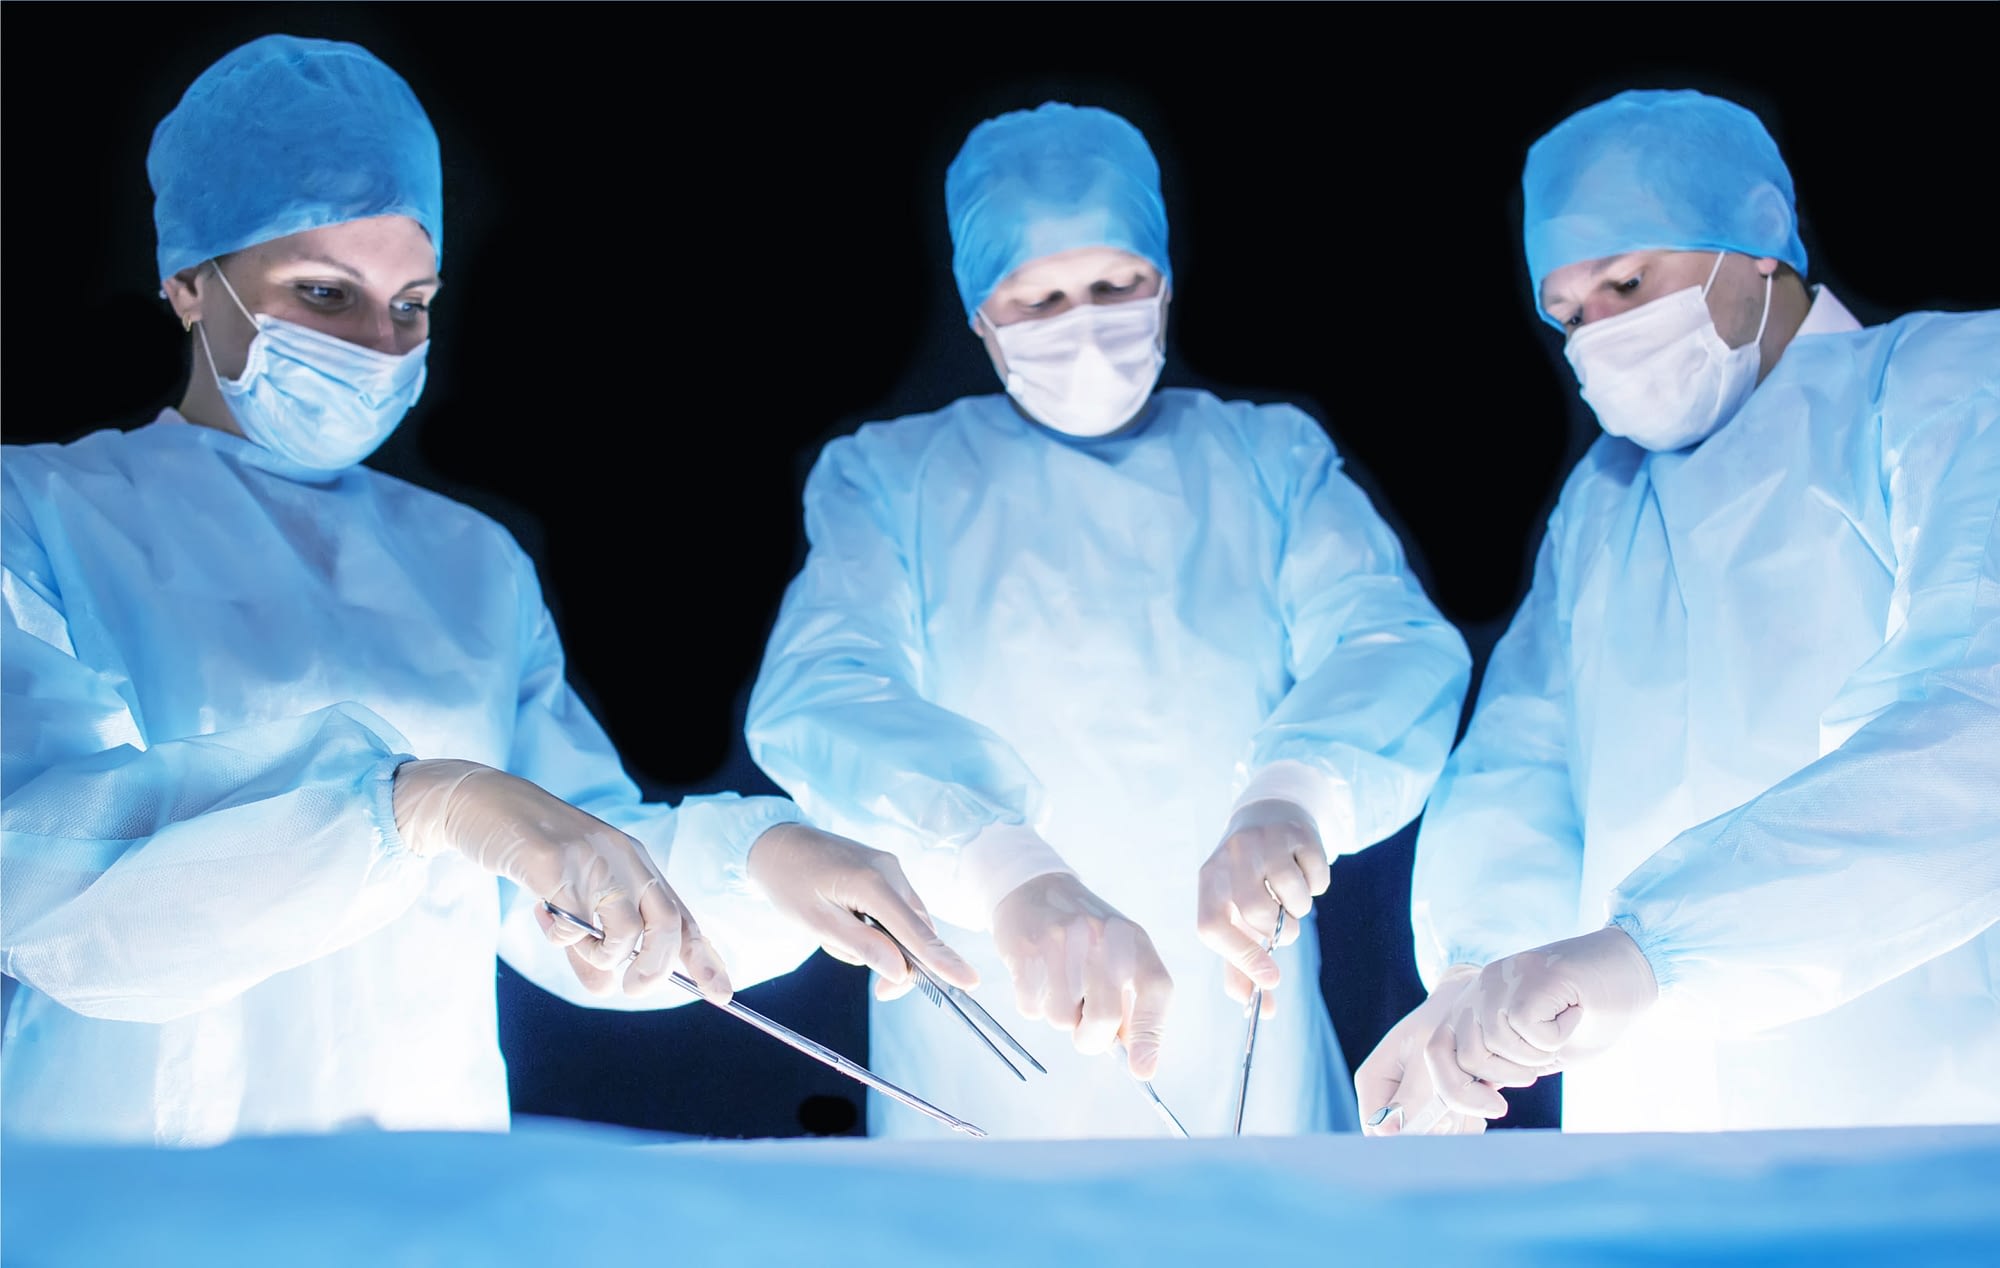 Three surgeons, a man and a woman, perform surgery in the operating room to remove and transplant human organs, resect the stomach and remove the gallbladder, appendicitis